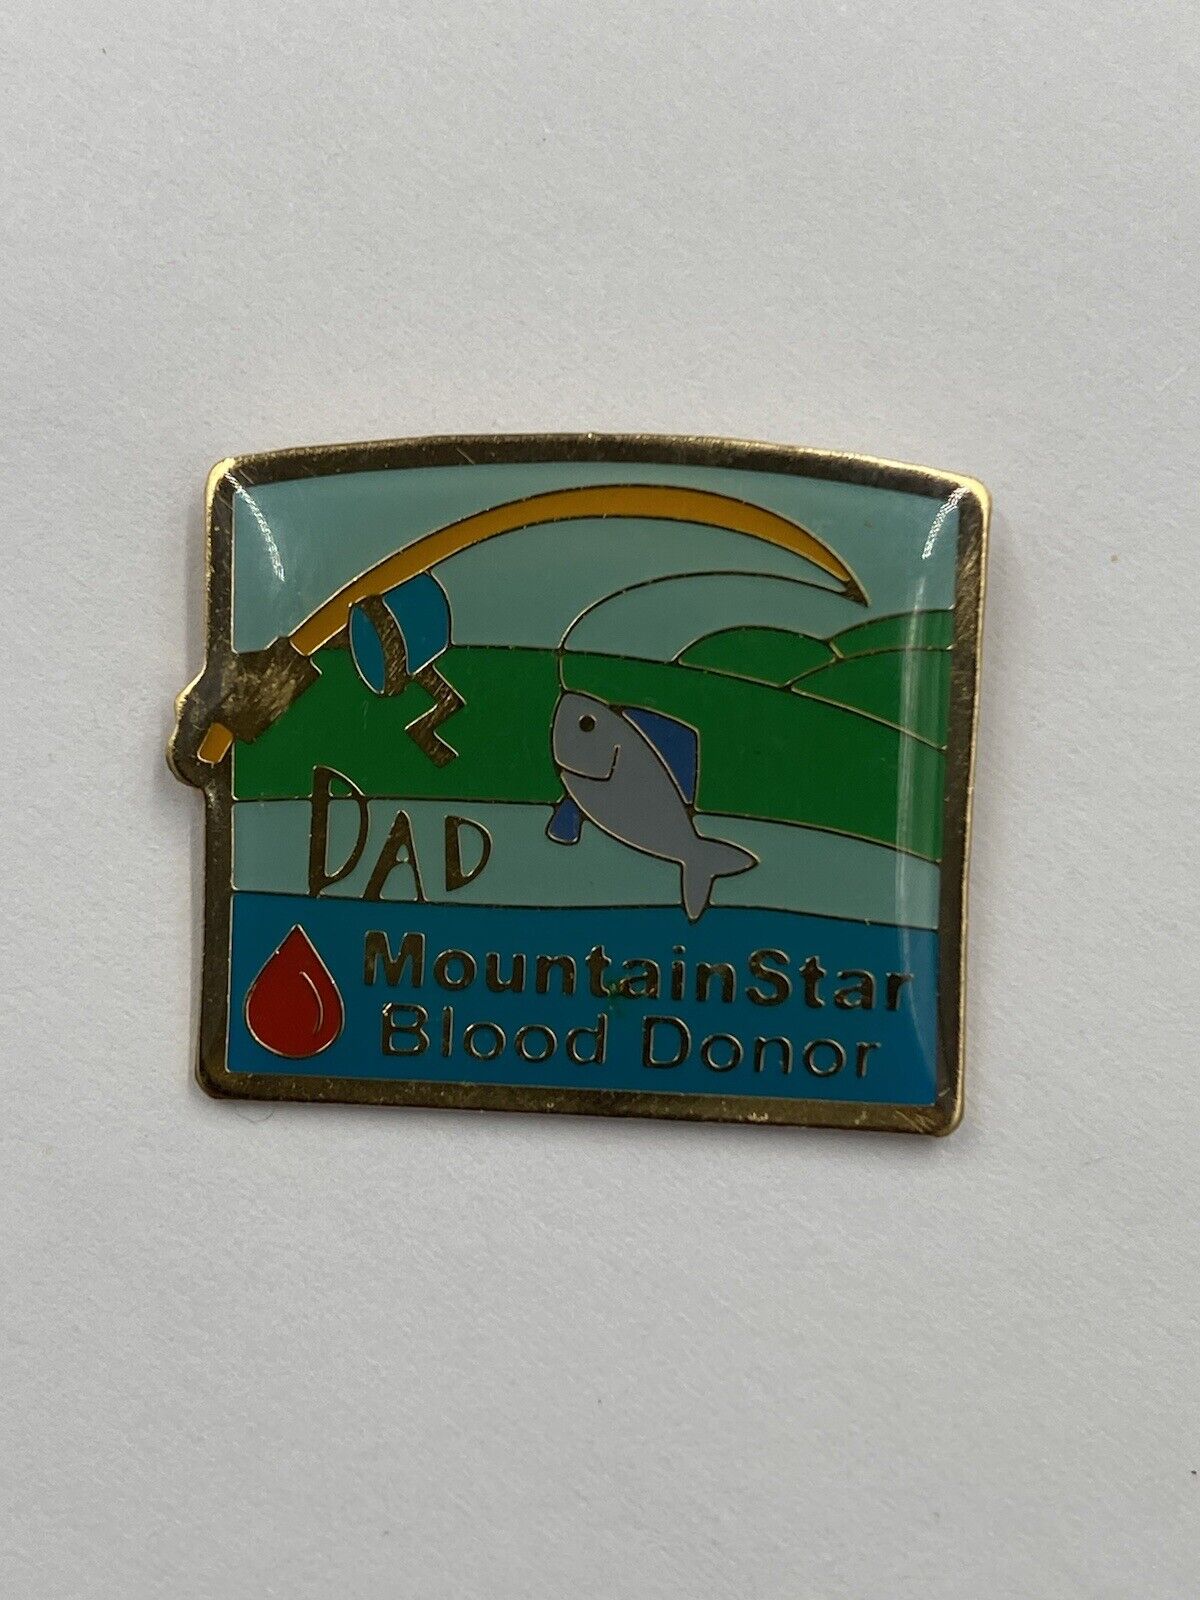 Vintage DAD Mountainstar Mountain Star Blood Donor Lapel Pin Brooch